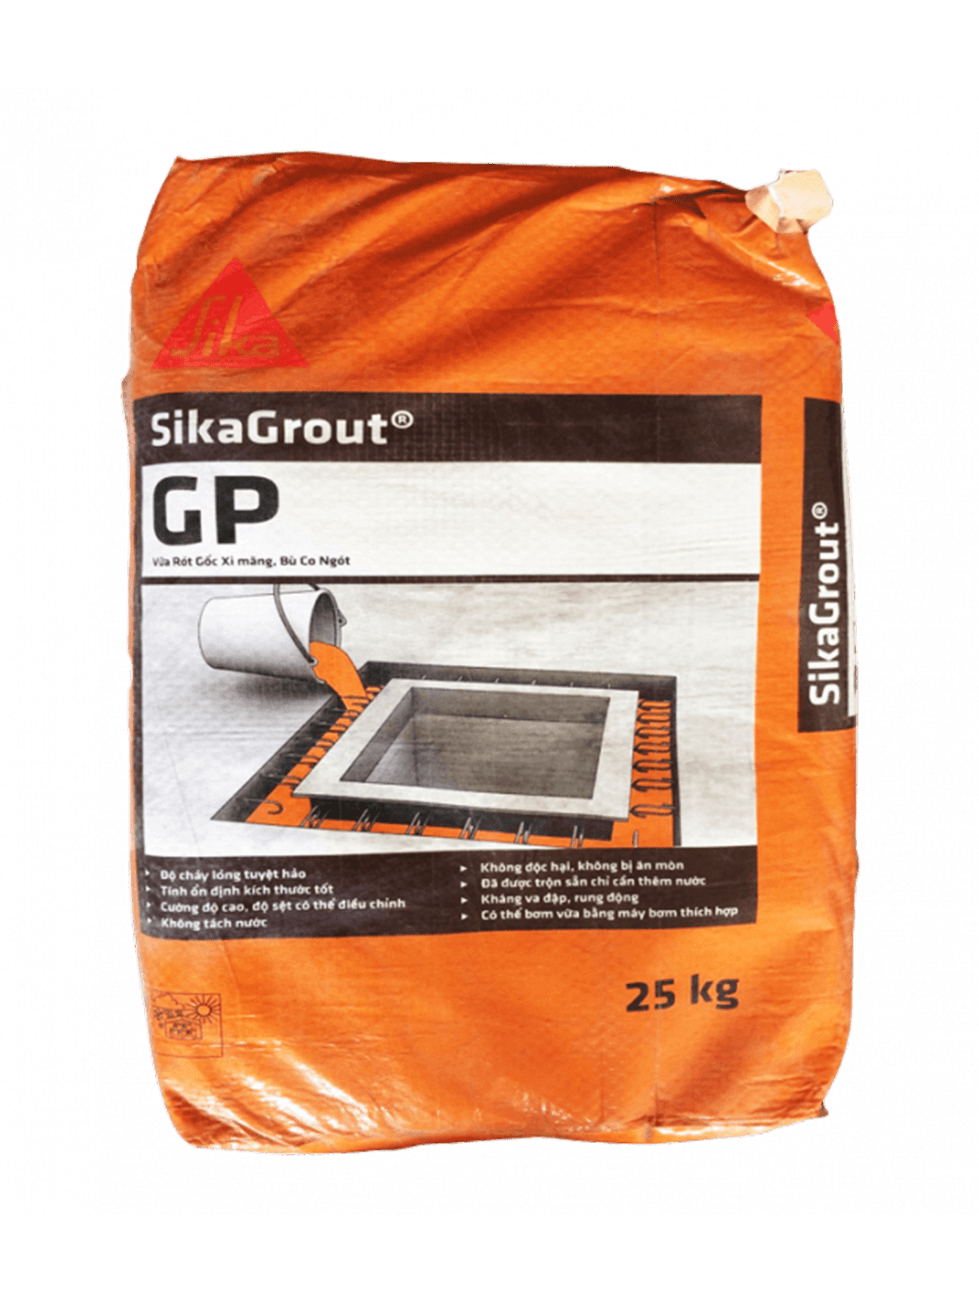 Sika grout